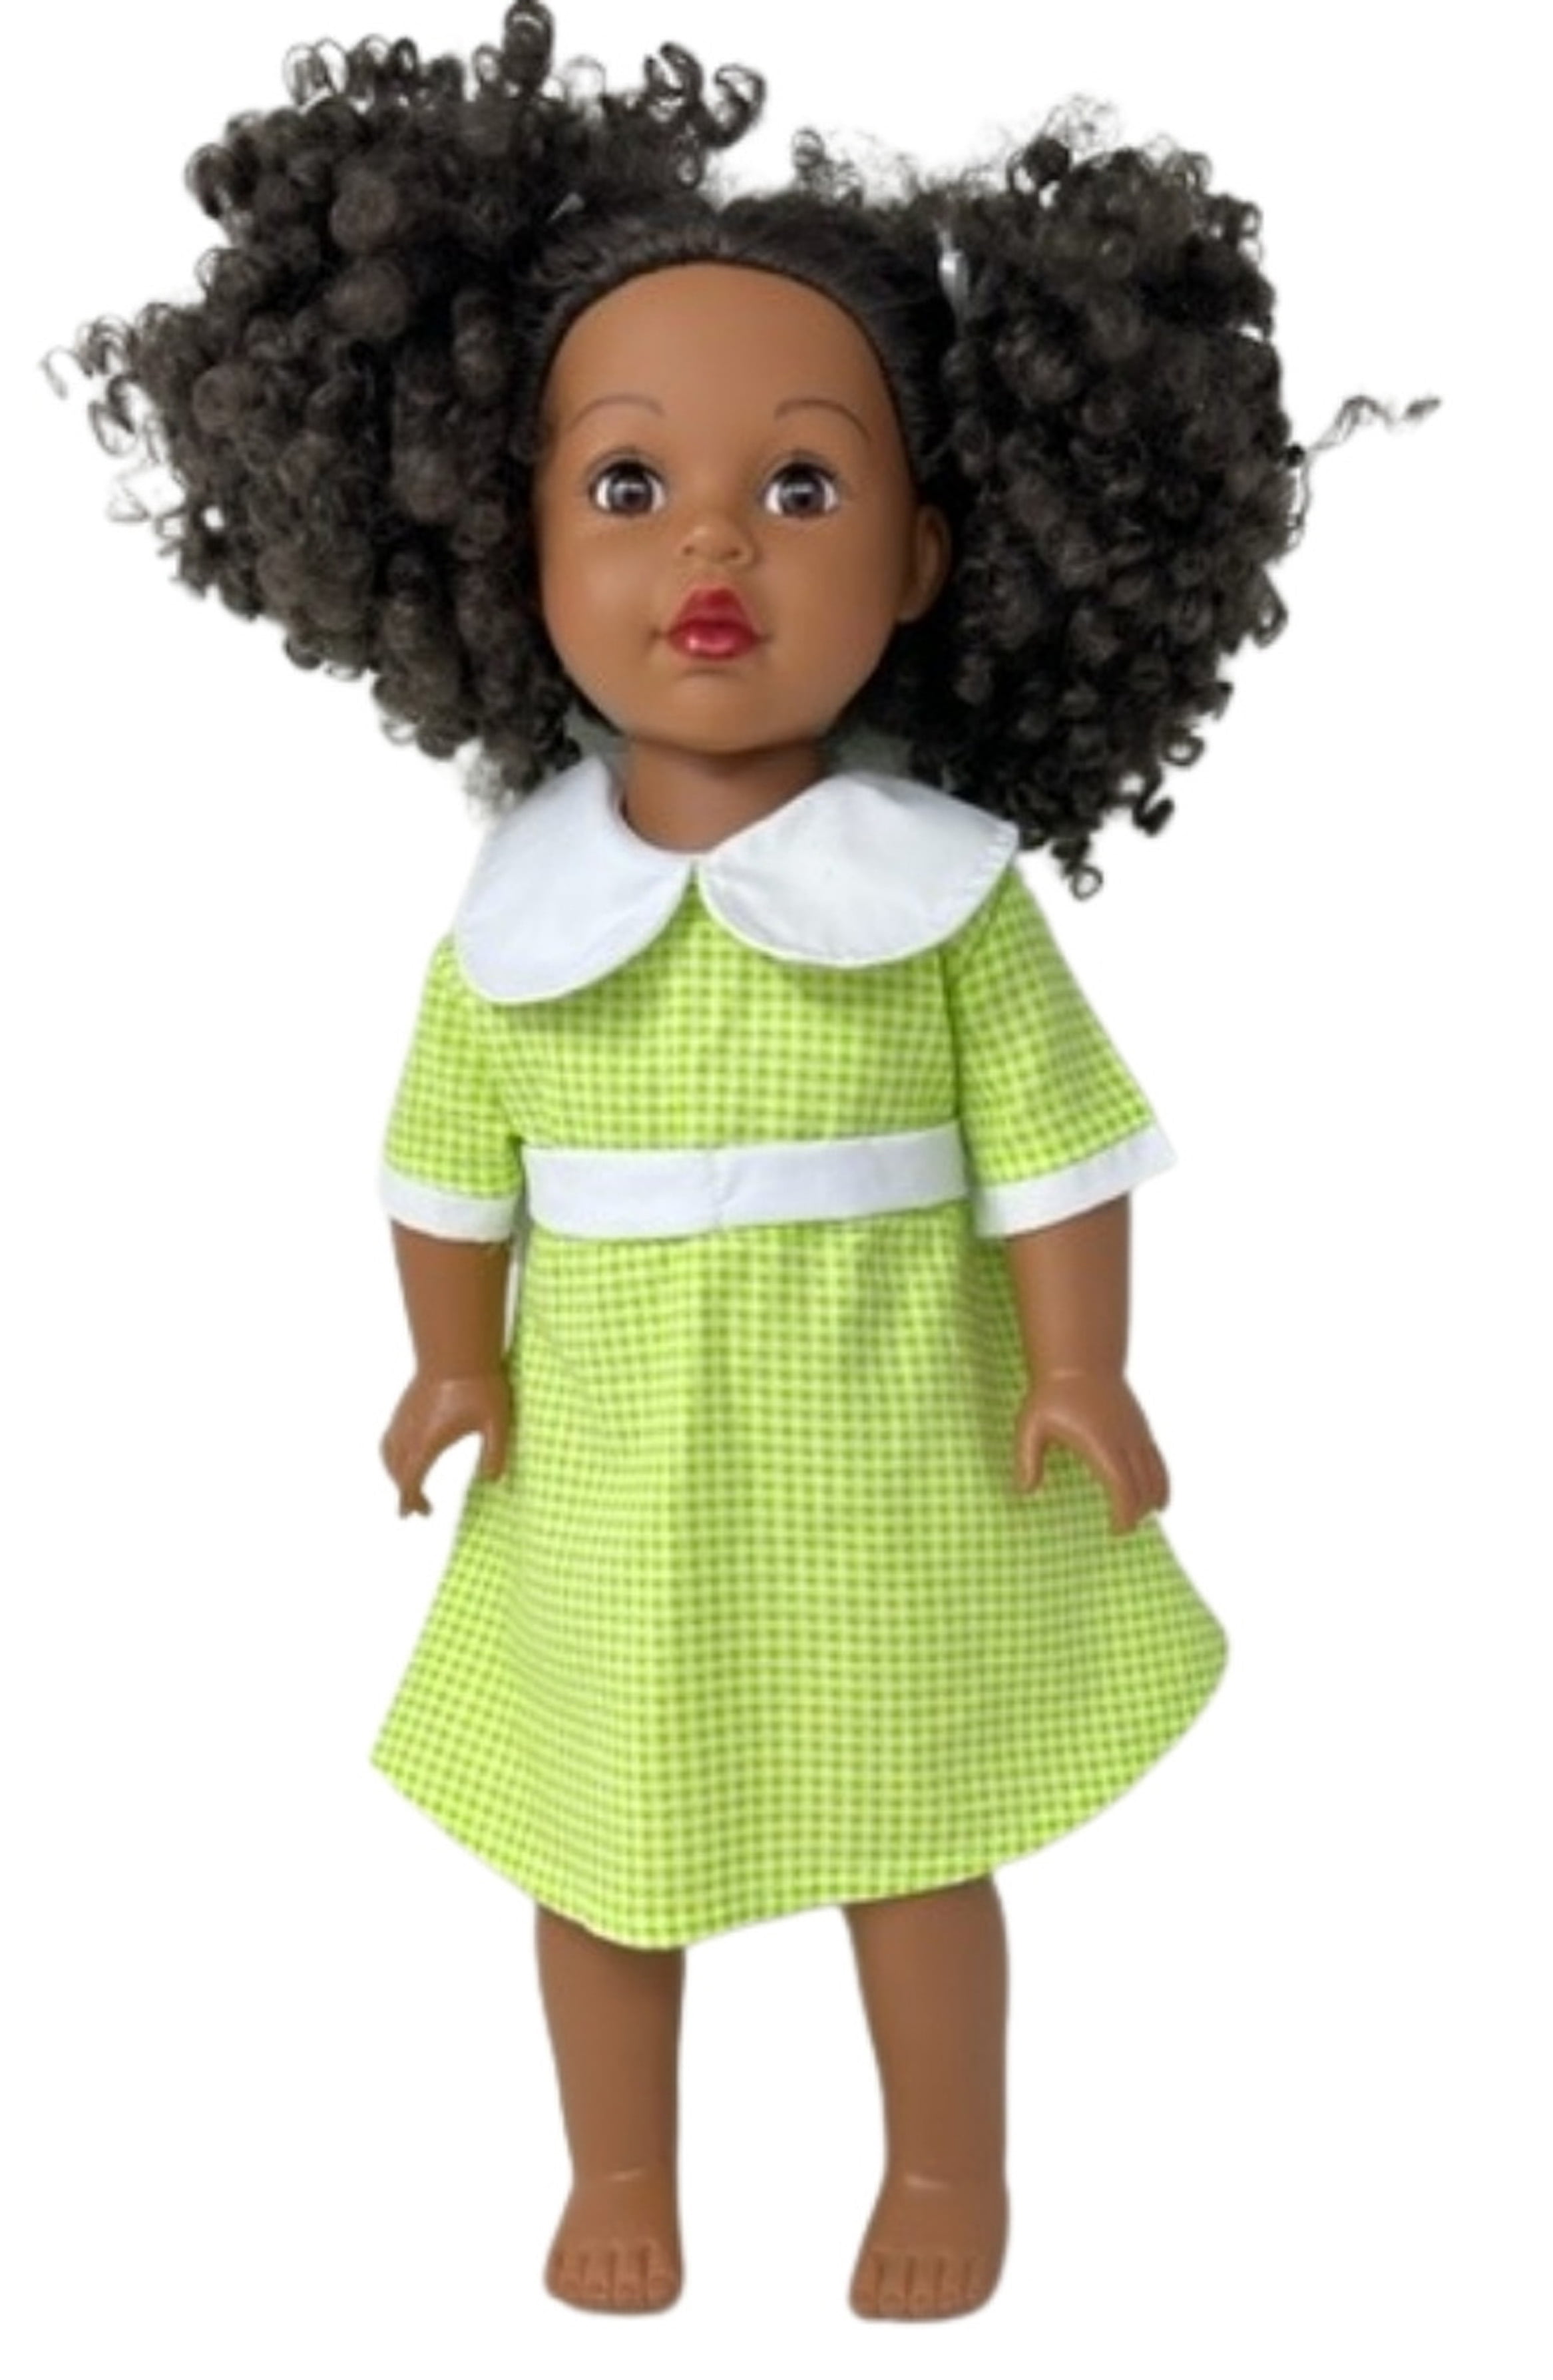 Doll Clothes Superstore Lime Green Casual Dress Fits 18 Inch Girl Dolls Like American Girl Our 